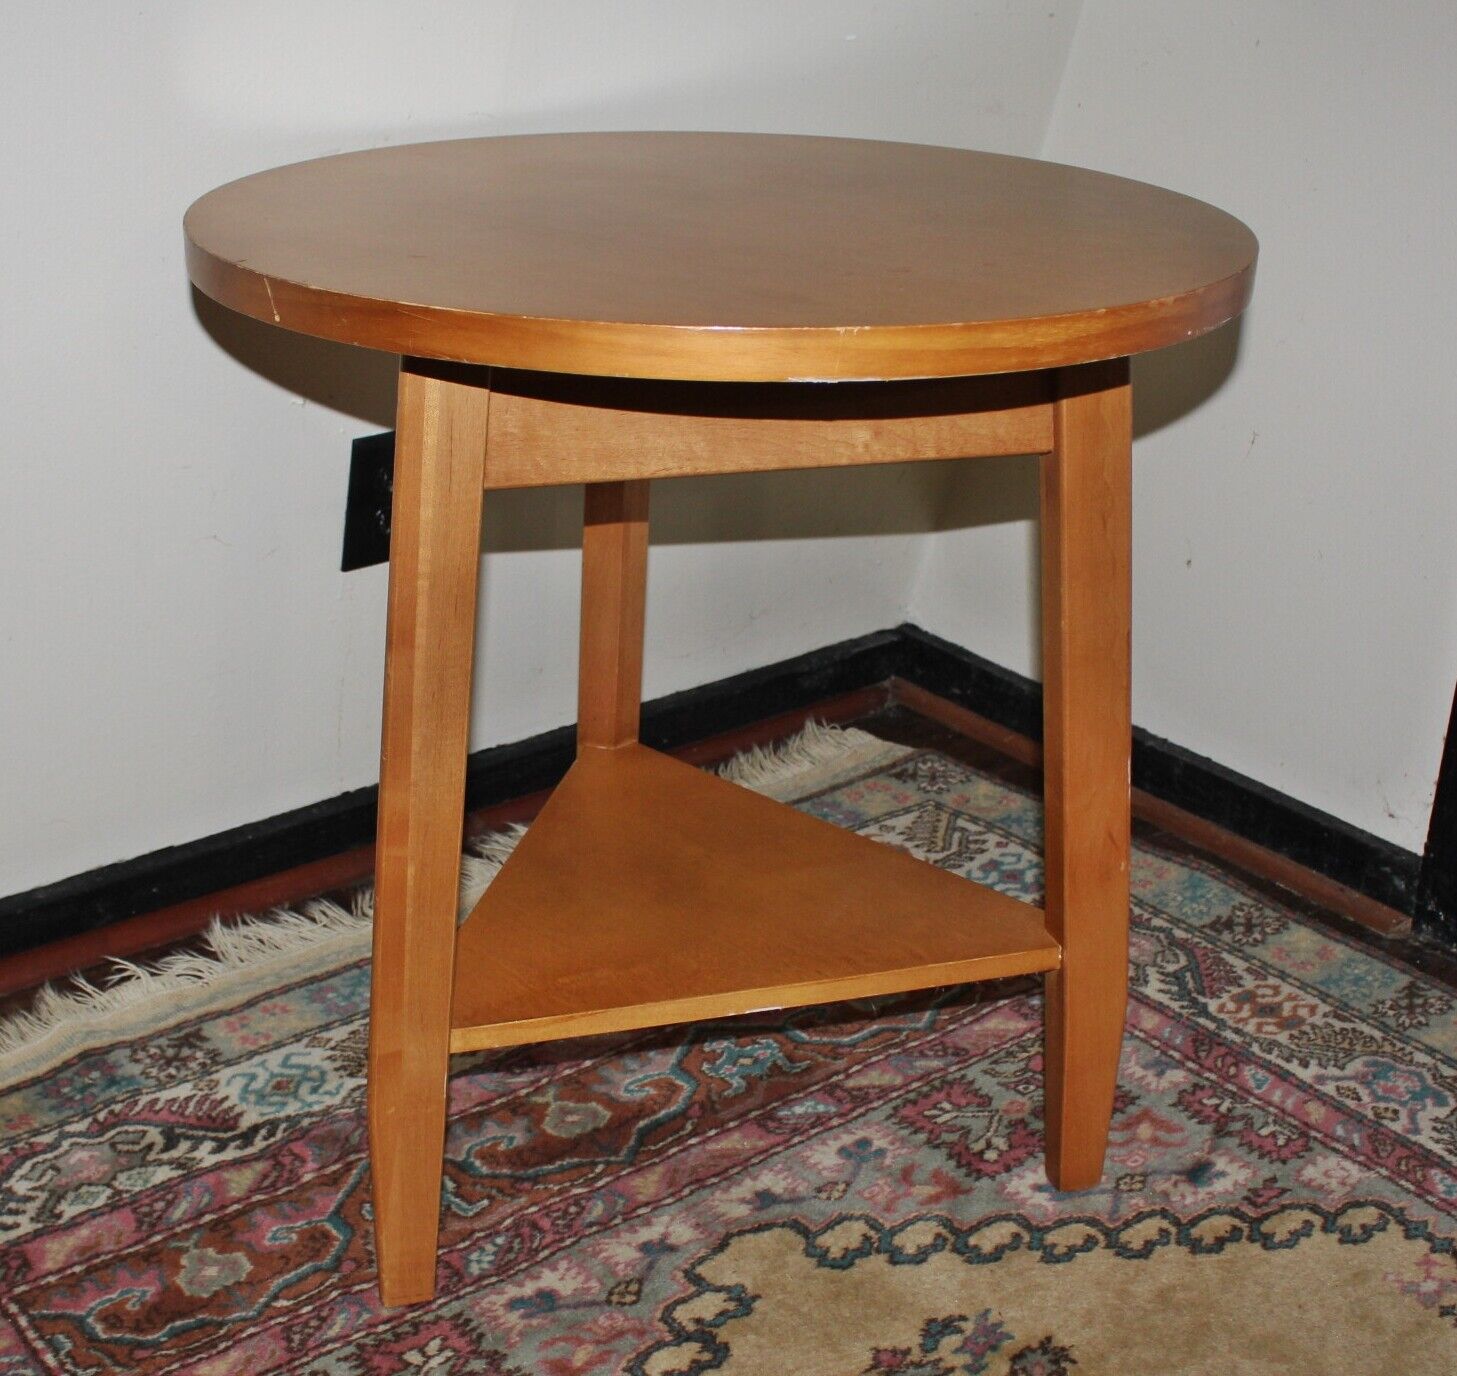 Vintage Lane Mid Century Modern Round Side Accent Table Made in USA Walnut 25"